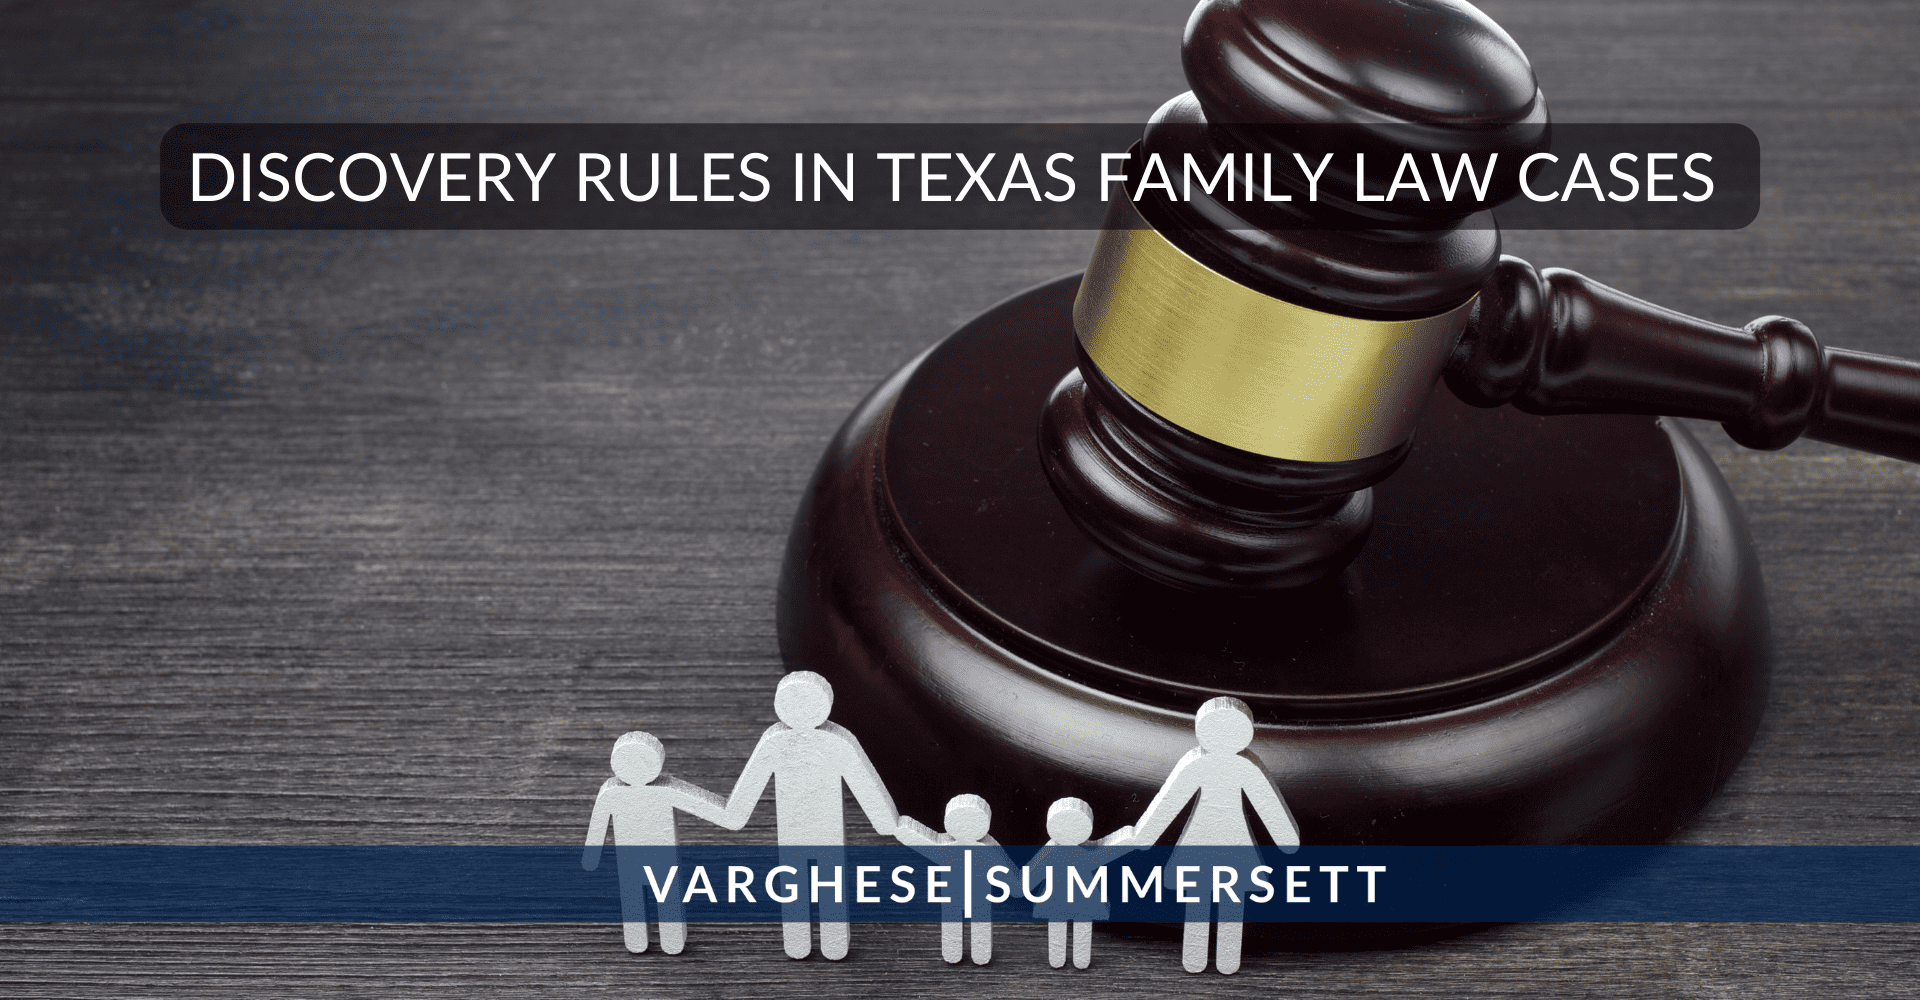 Discovery Rules in Texas Family Law Cases